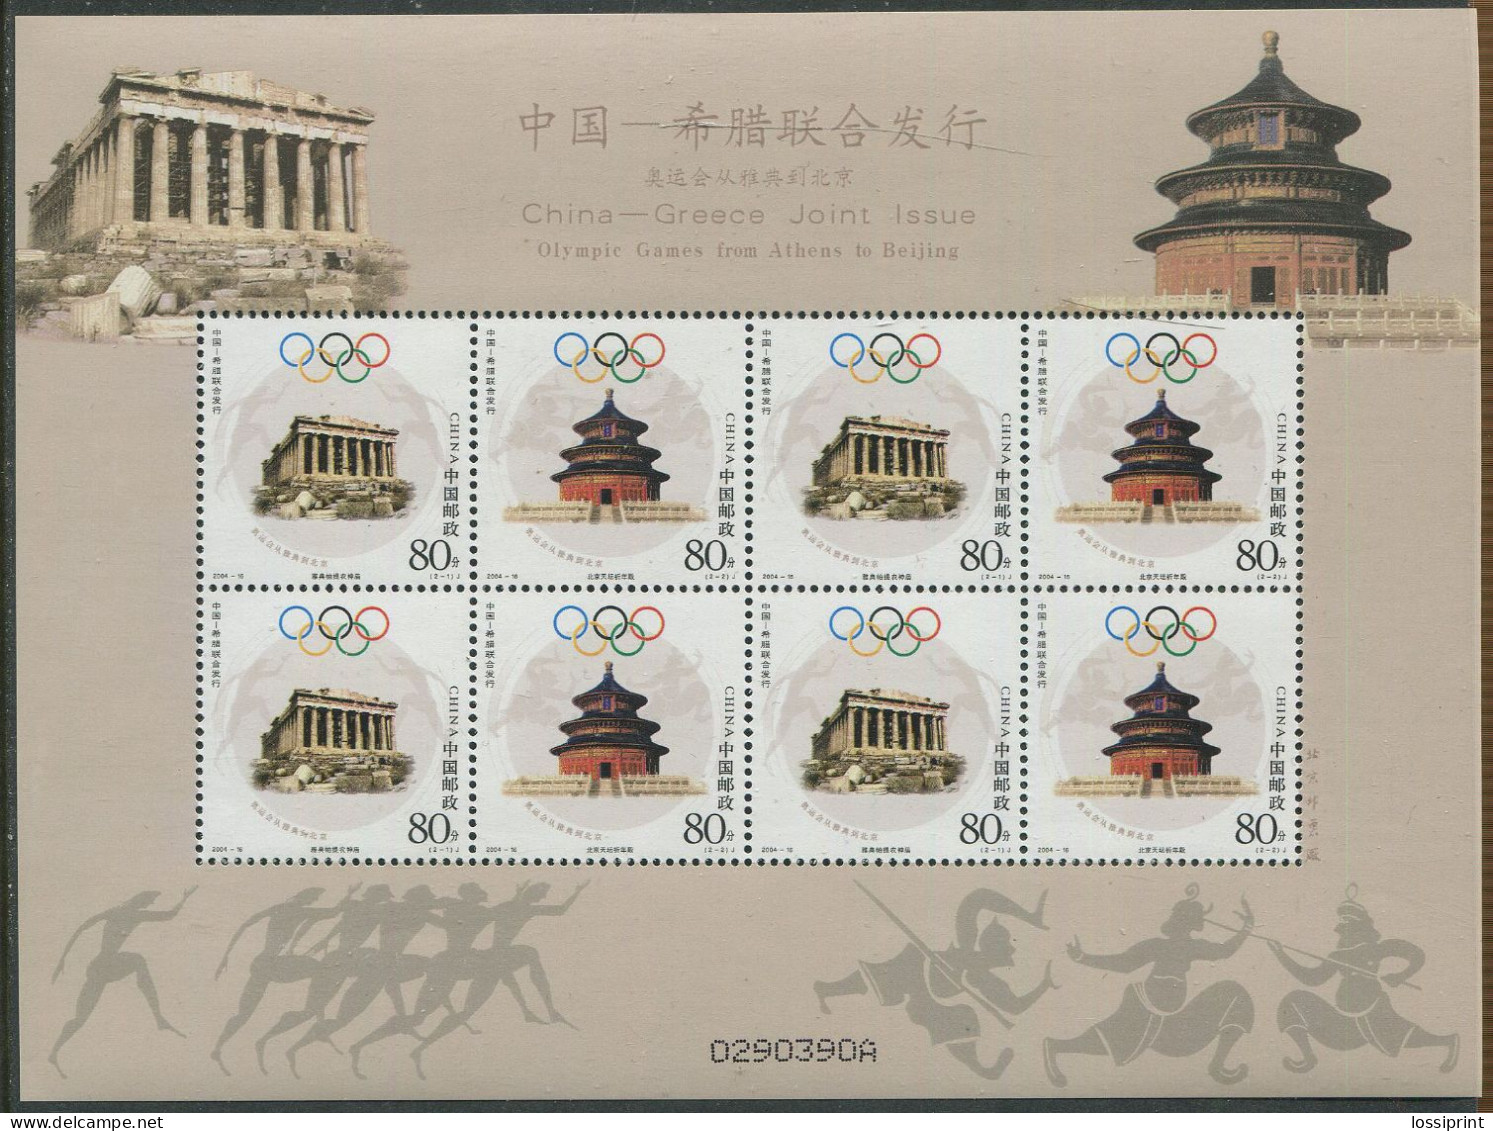 China:Greece:Unused Block Athens And Beijing Olympic Games, Joint Issue, 2004, MNH - Zomer 2004: Athene